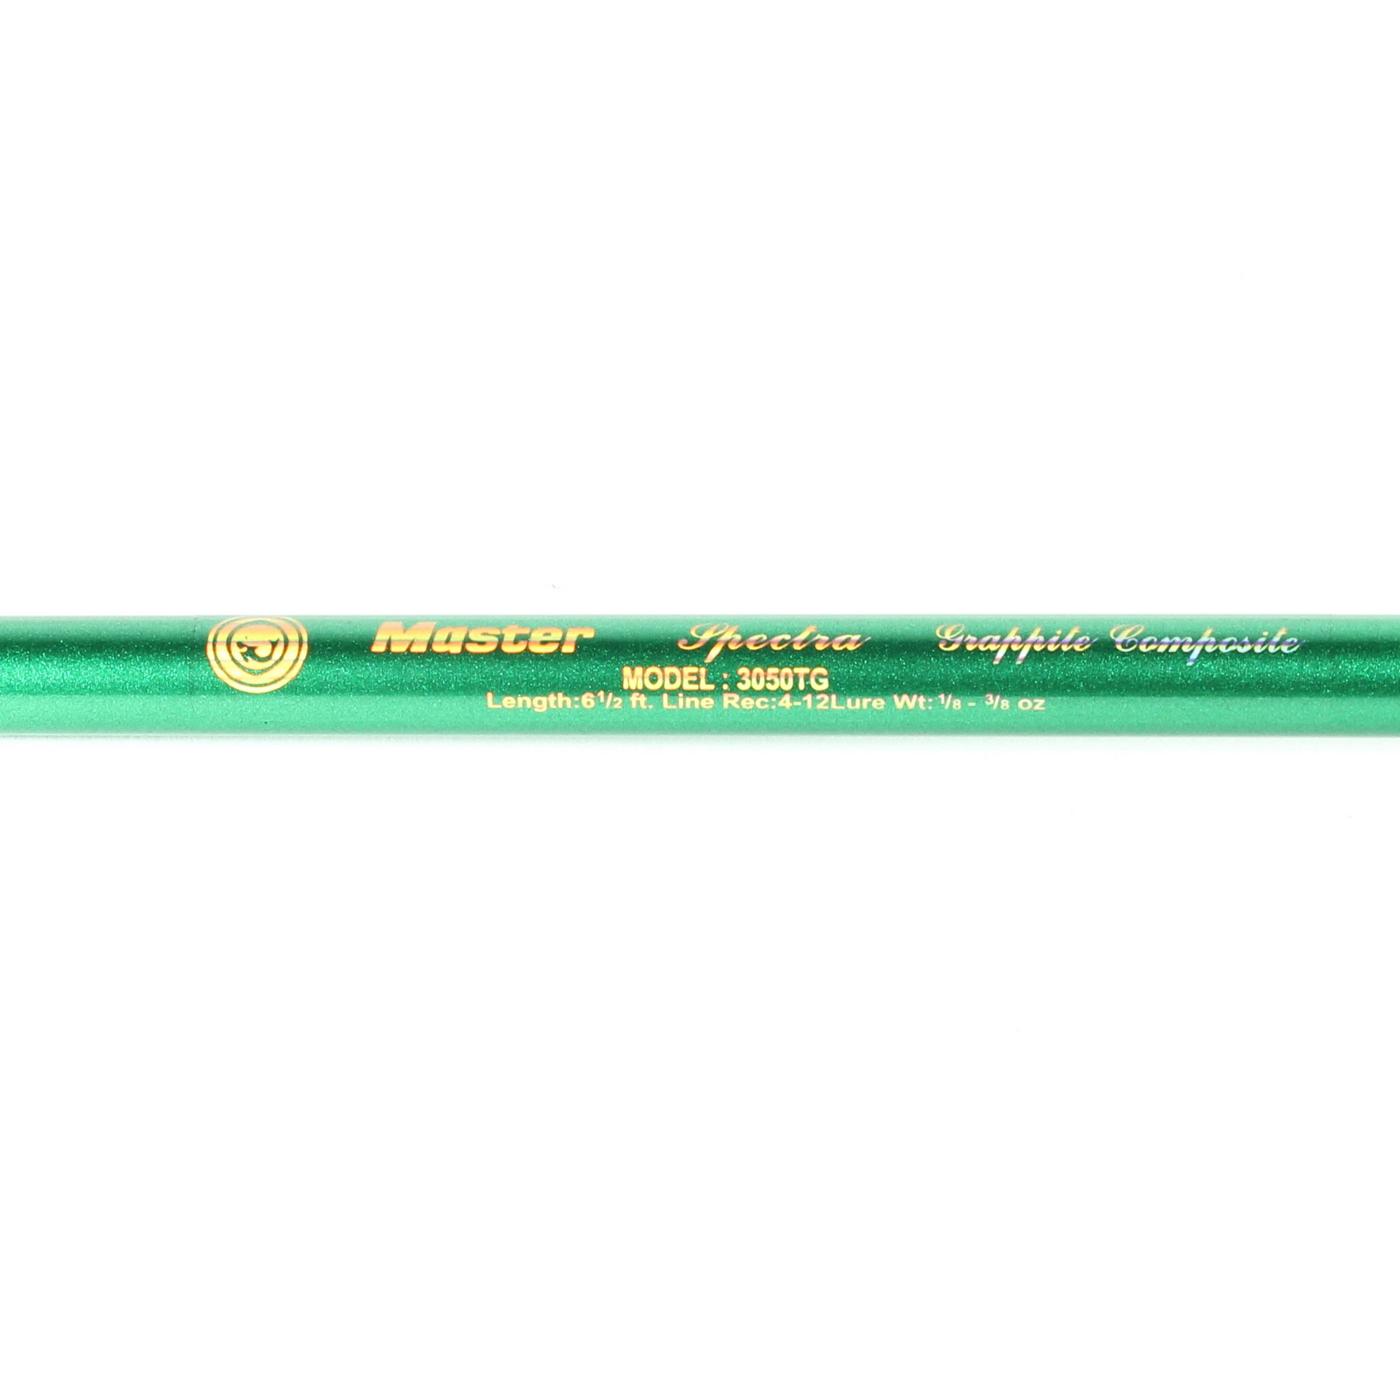 Master 6' 6'' Spectra Green 2 Piece Spinning Combo Rod - Shop Fishing at  H-E-B